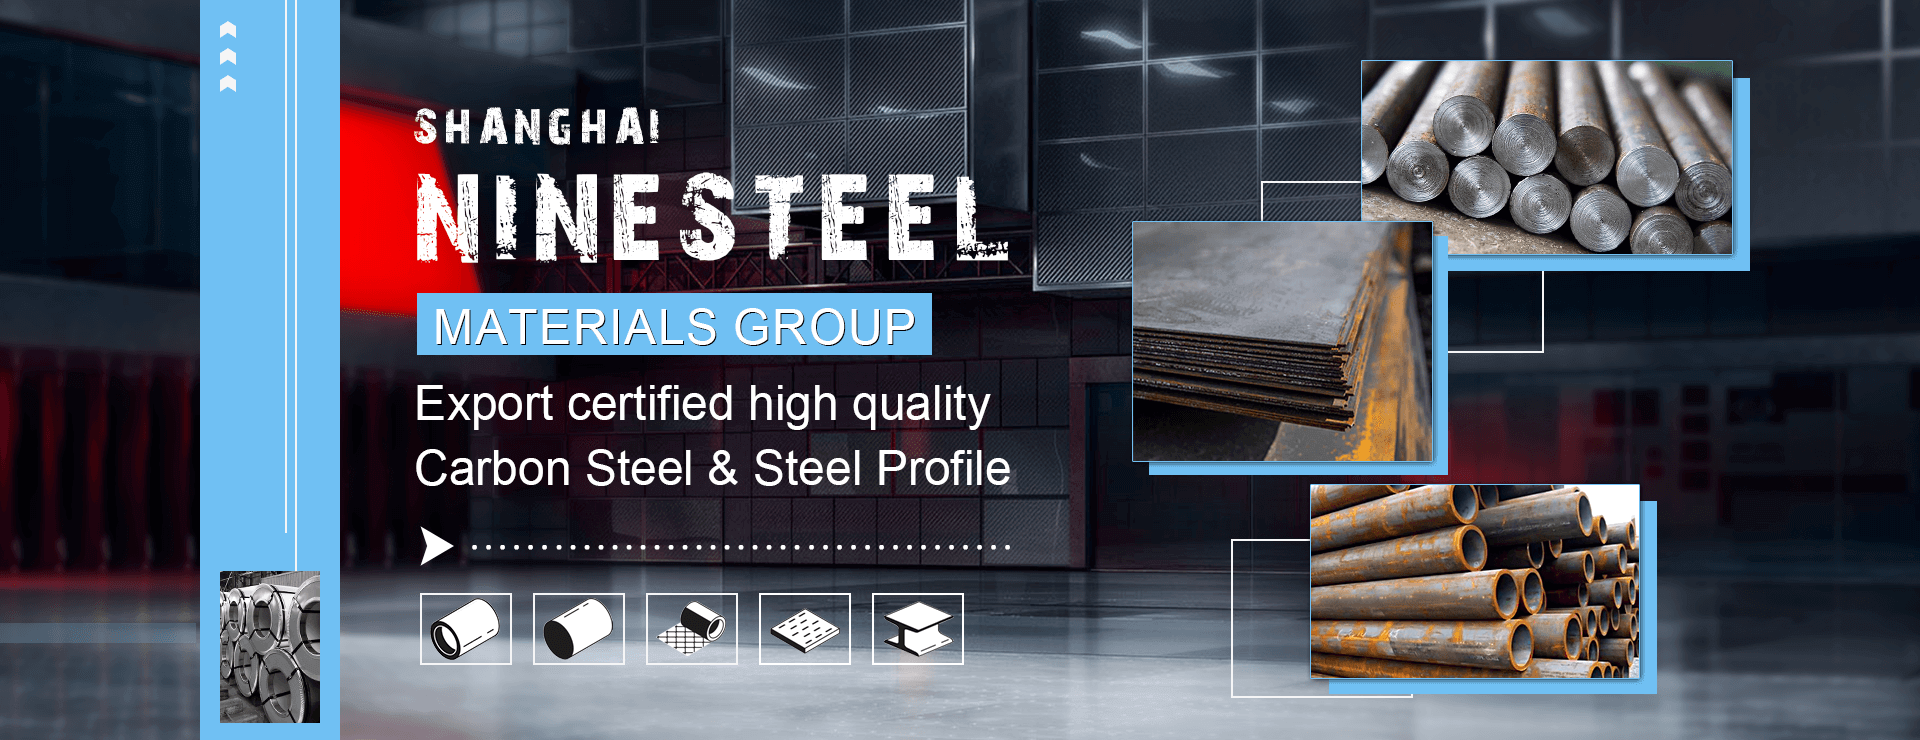 Ninesteel -The most professional carbon steel supplier in China